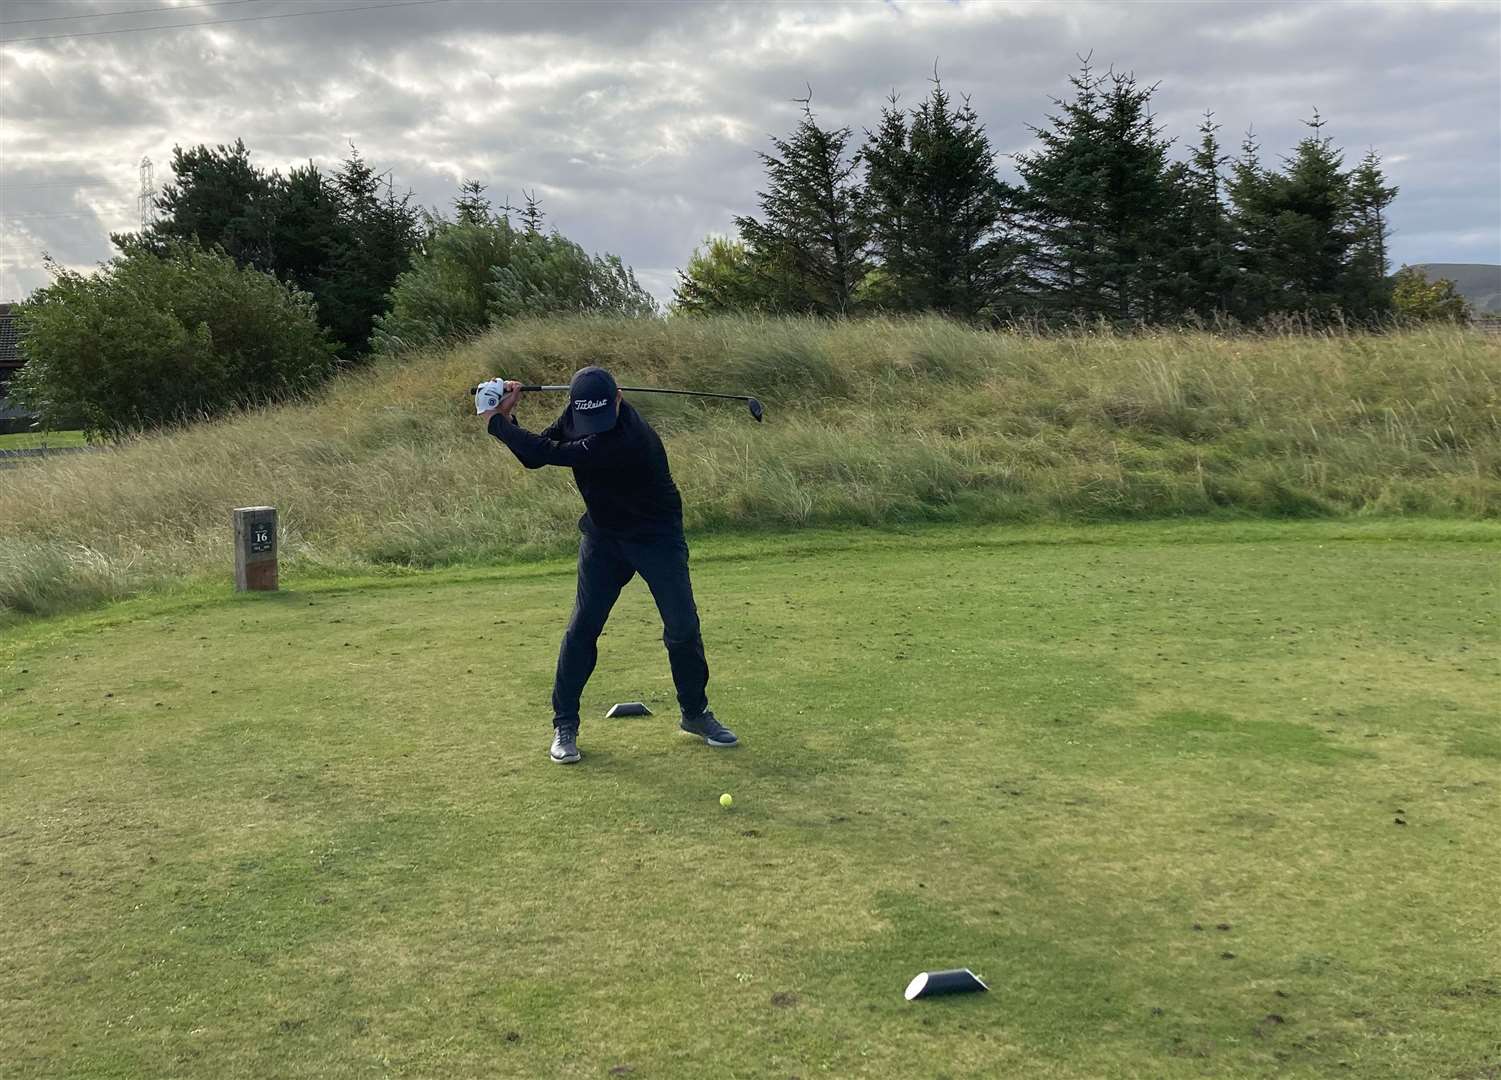 Gavin Gunn teeing off at the 16th hole during the North Point Distillery Open at Reay Golf Club.